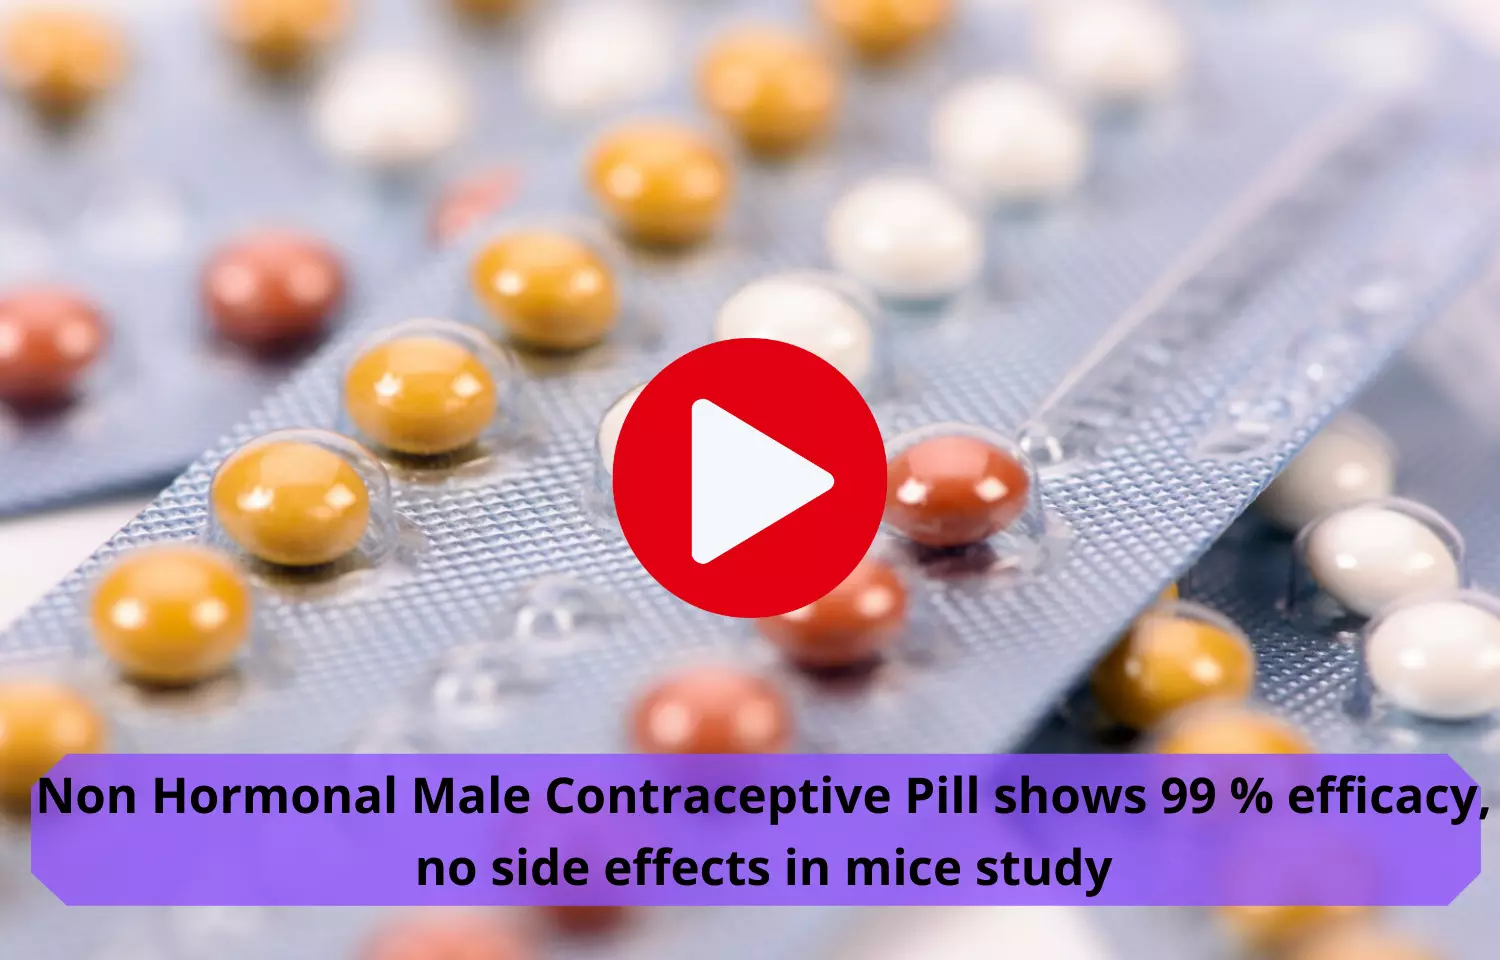 Non Hormonal Male Contraceptive Pill shows 99 % efficacy,  with no side effects